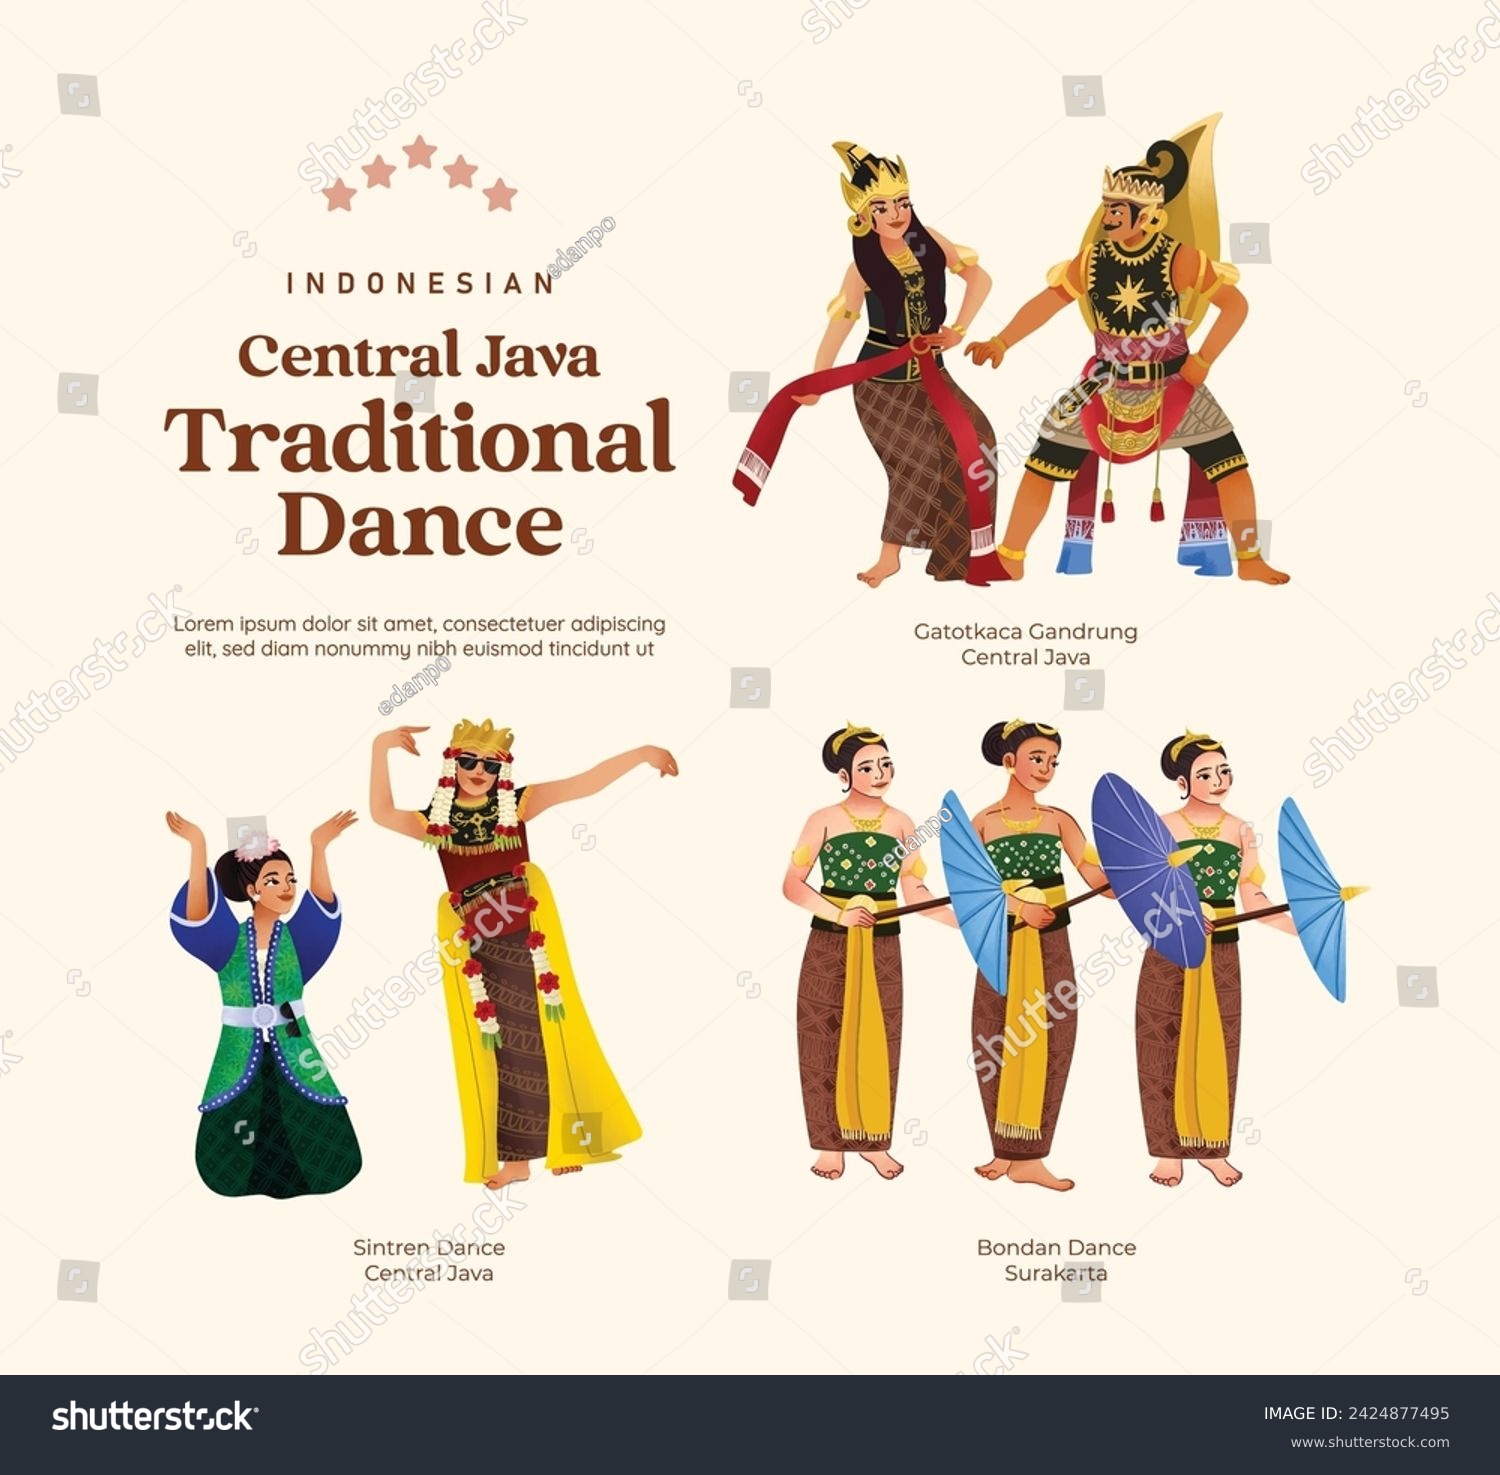 SVG of Isolated Indonesian culture Central Java Dance illustration cell shaded style svg